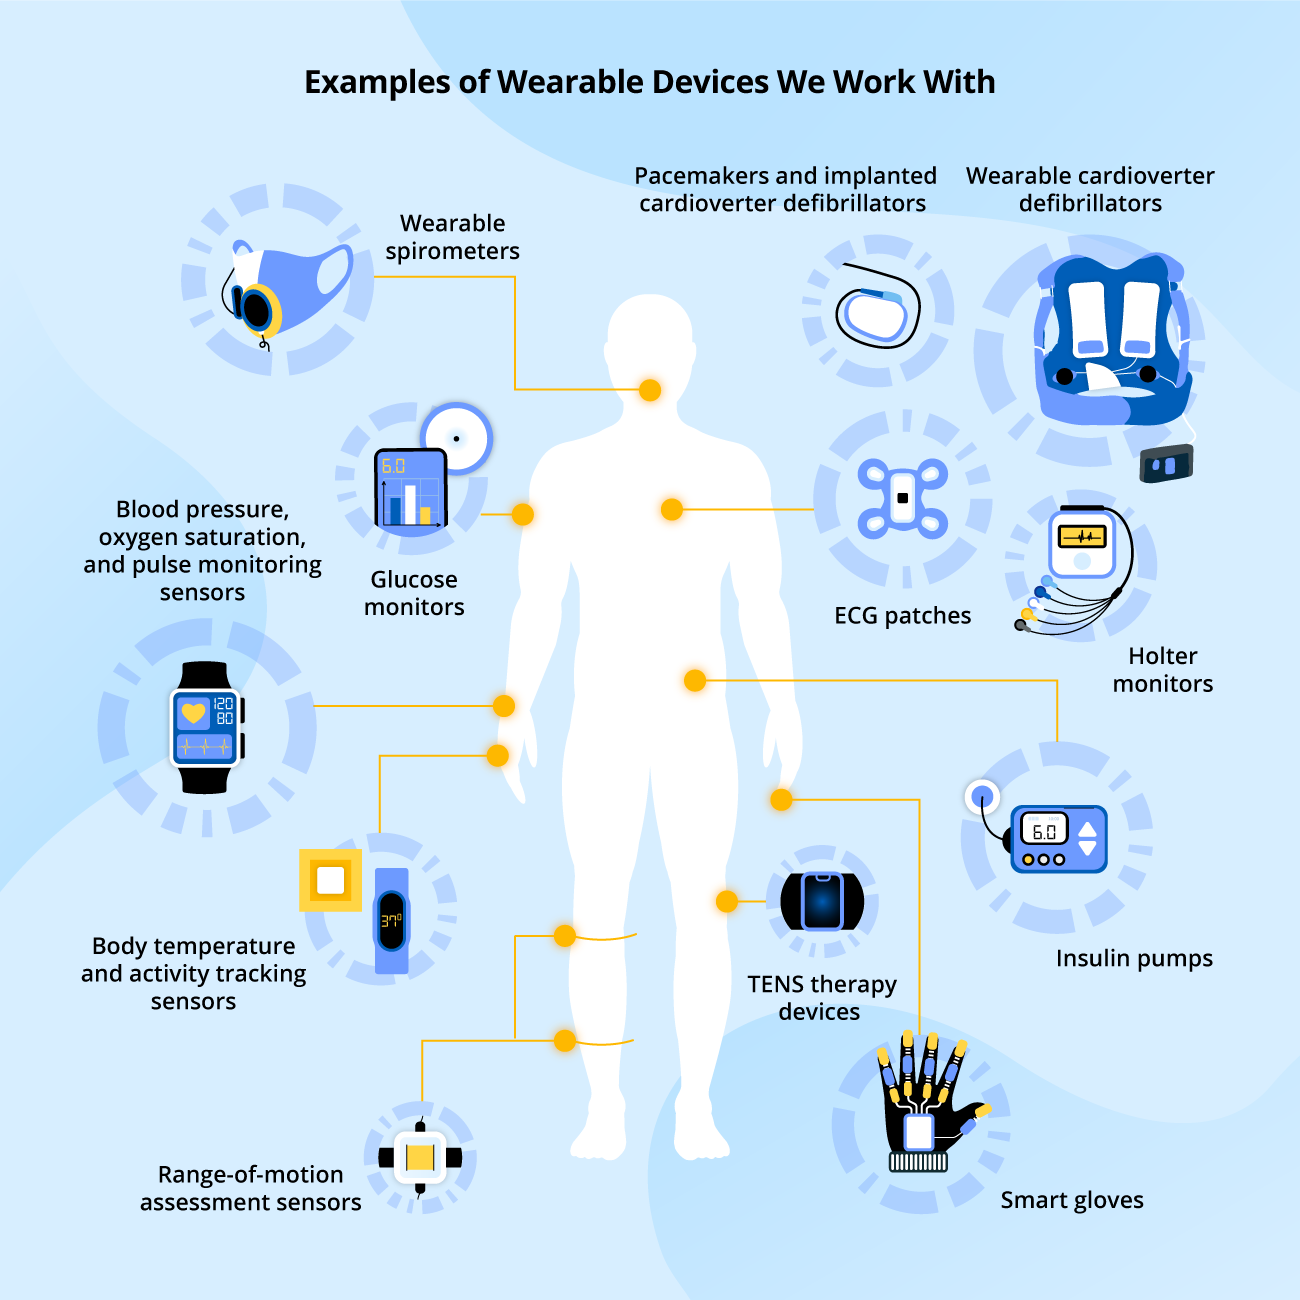 How are wearable technologies changing patient health monitoring?